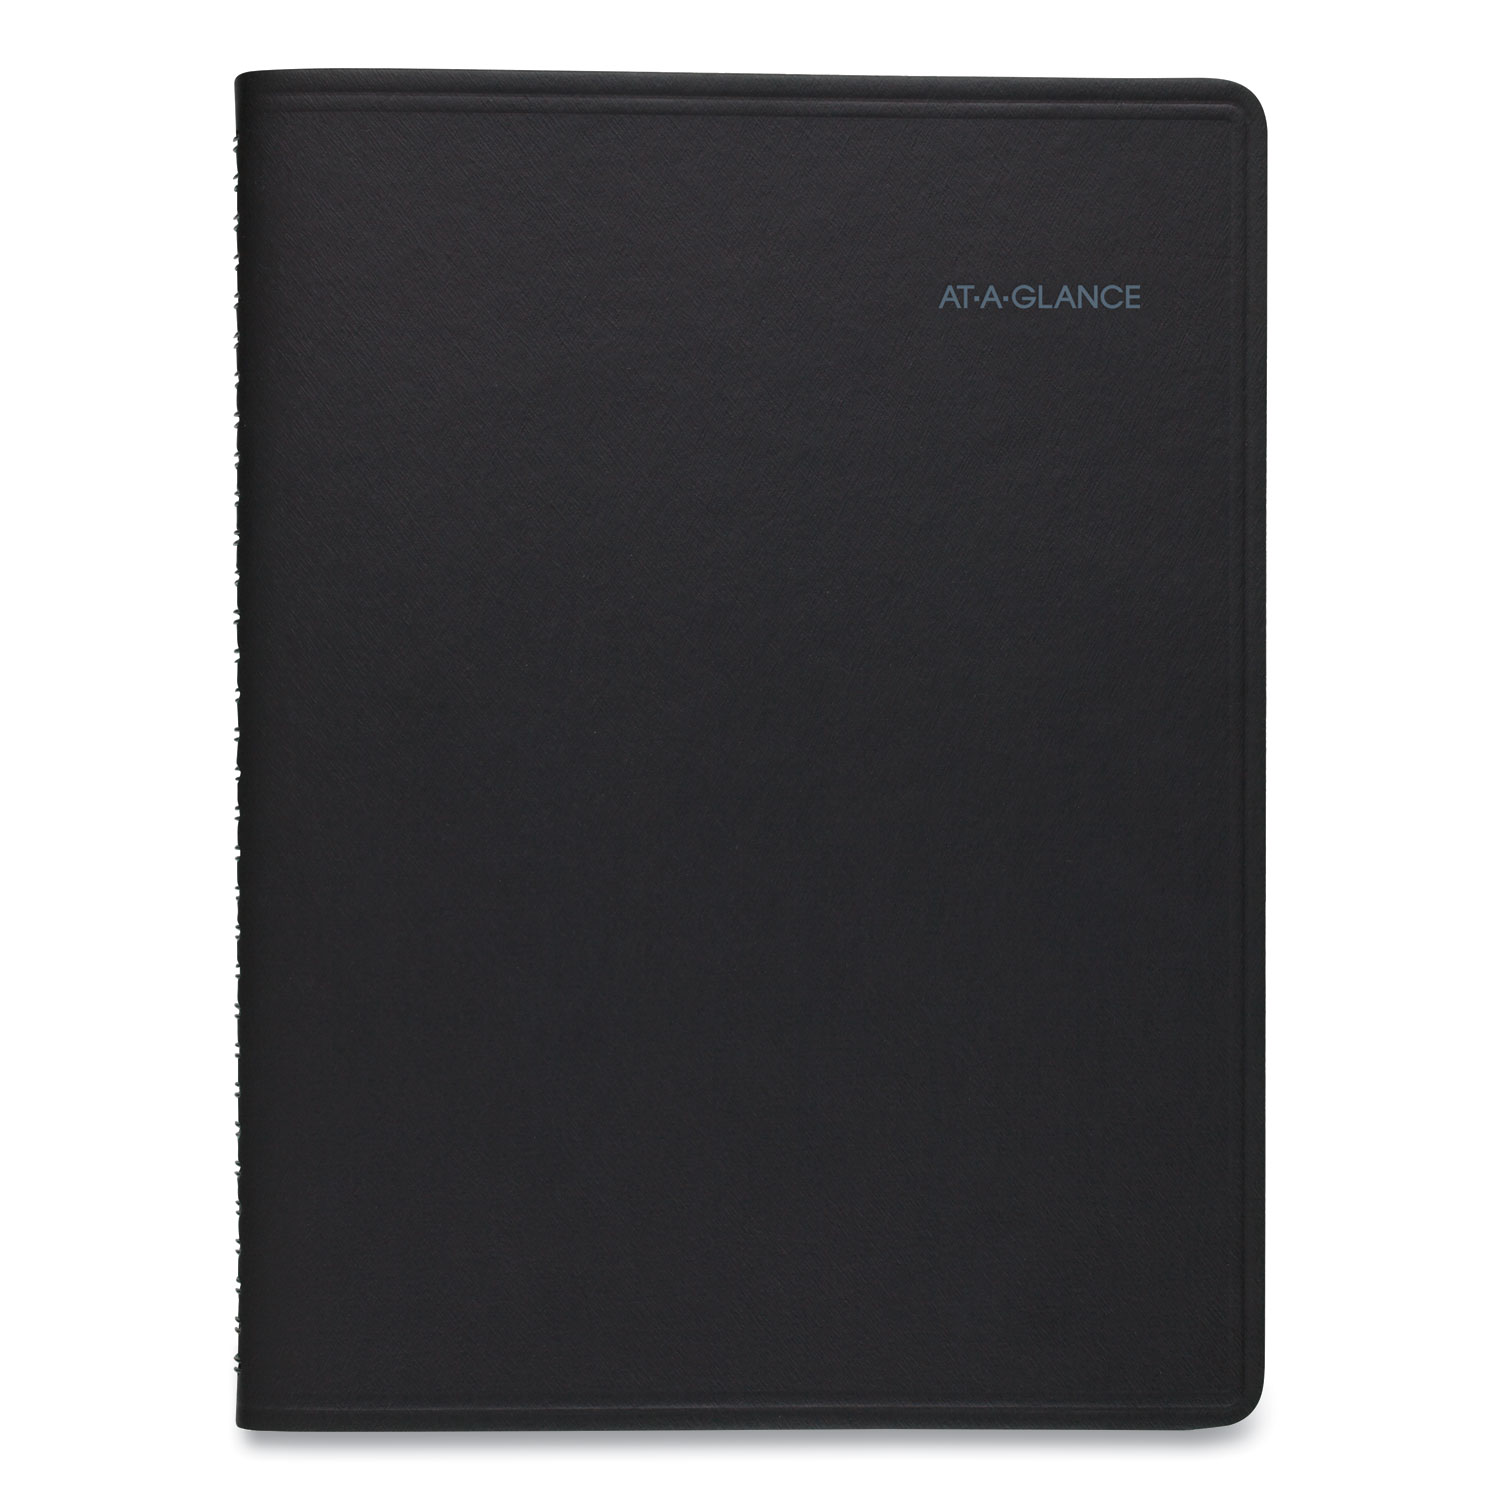  AT-A-GLANCE 76-950-05 QuickNotes Weekly/Monthly Appointment Book, 10 7/8 x 8 1/4, Black, 2020 (AAG7695005) 